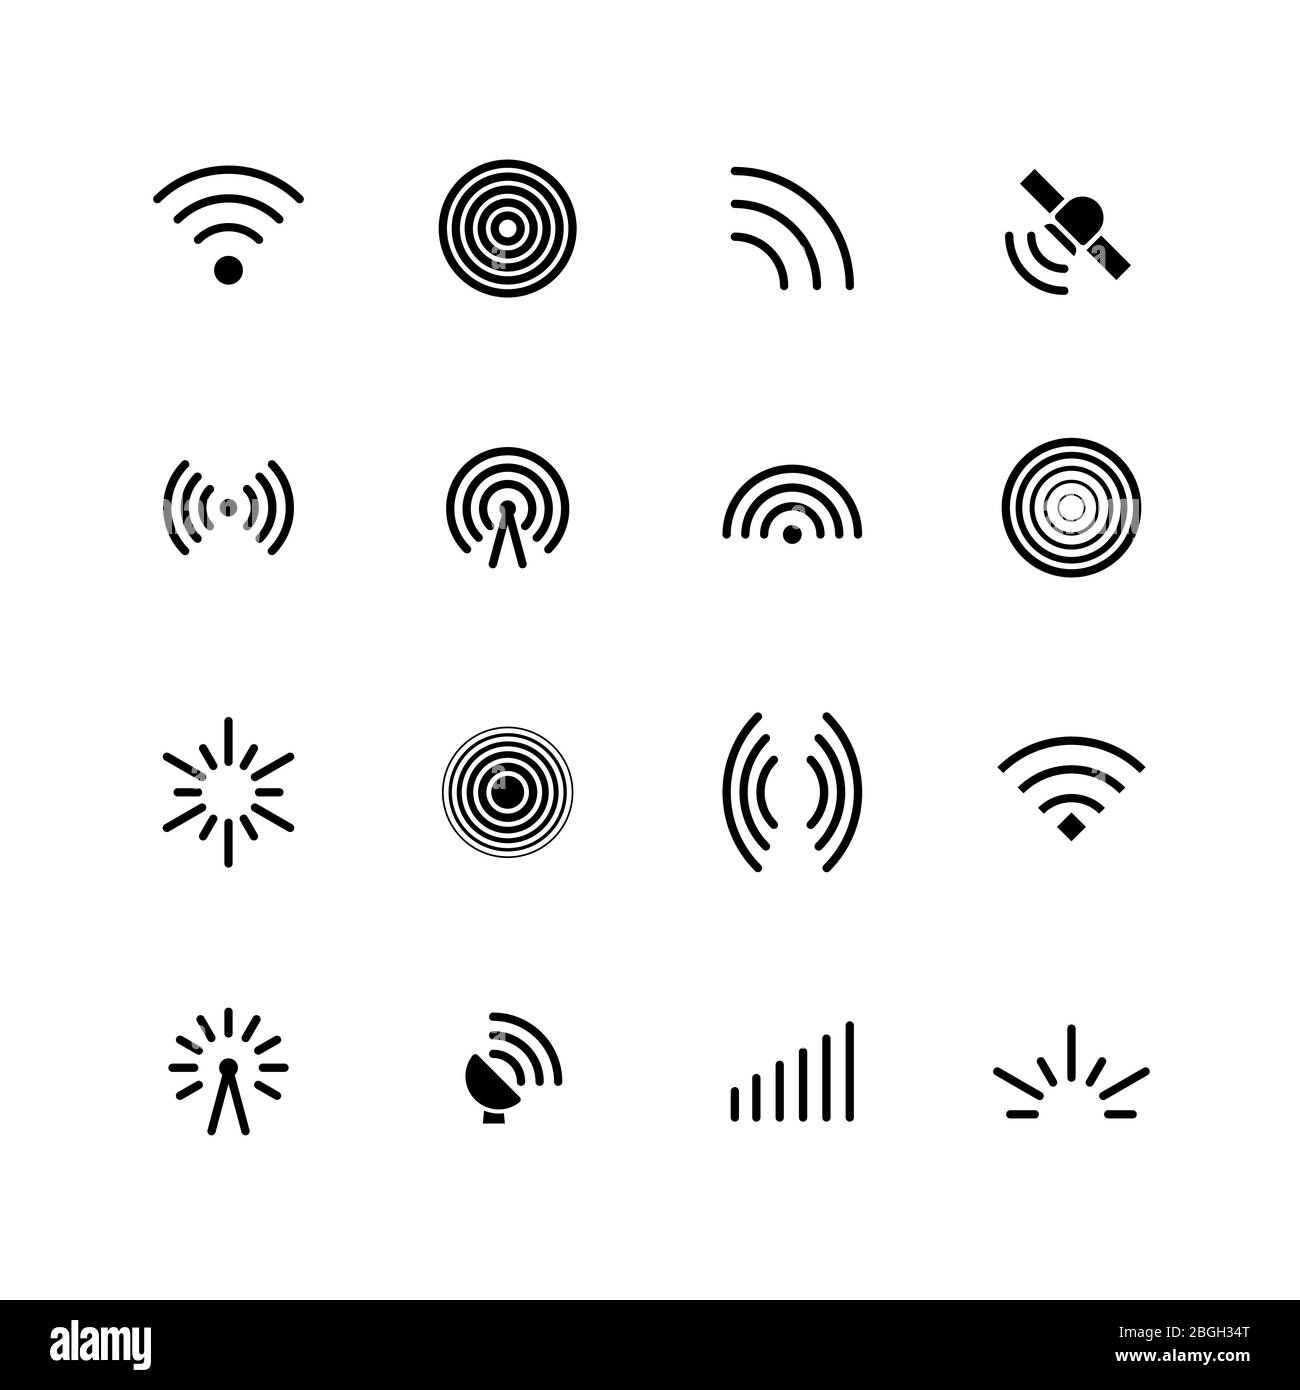 Wireless wifi and radio signals icons. Antenna, mobile signal and wave vector symbols isolated. Radio antenna and wireless network illustration Stock Vector